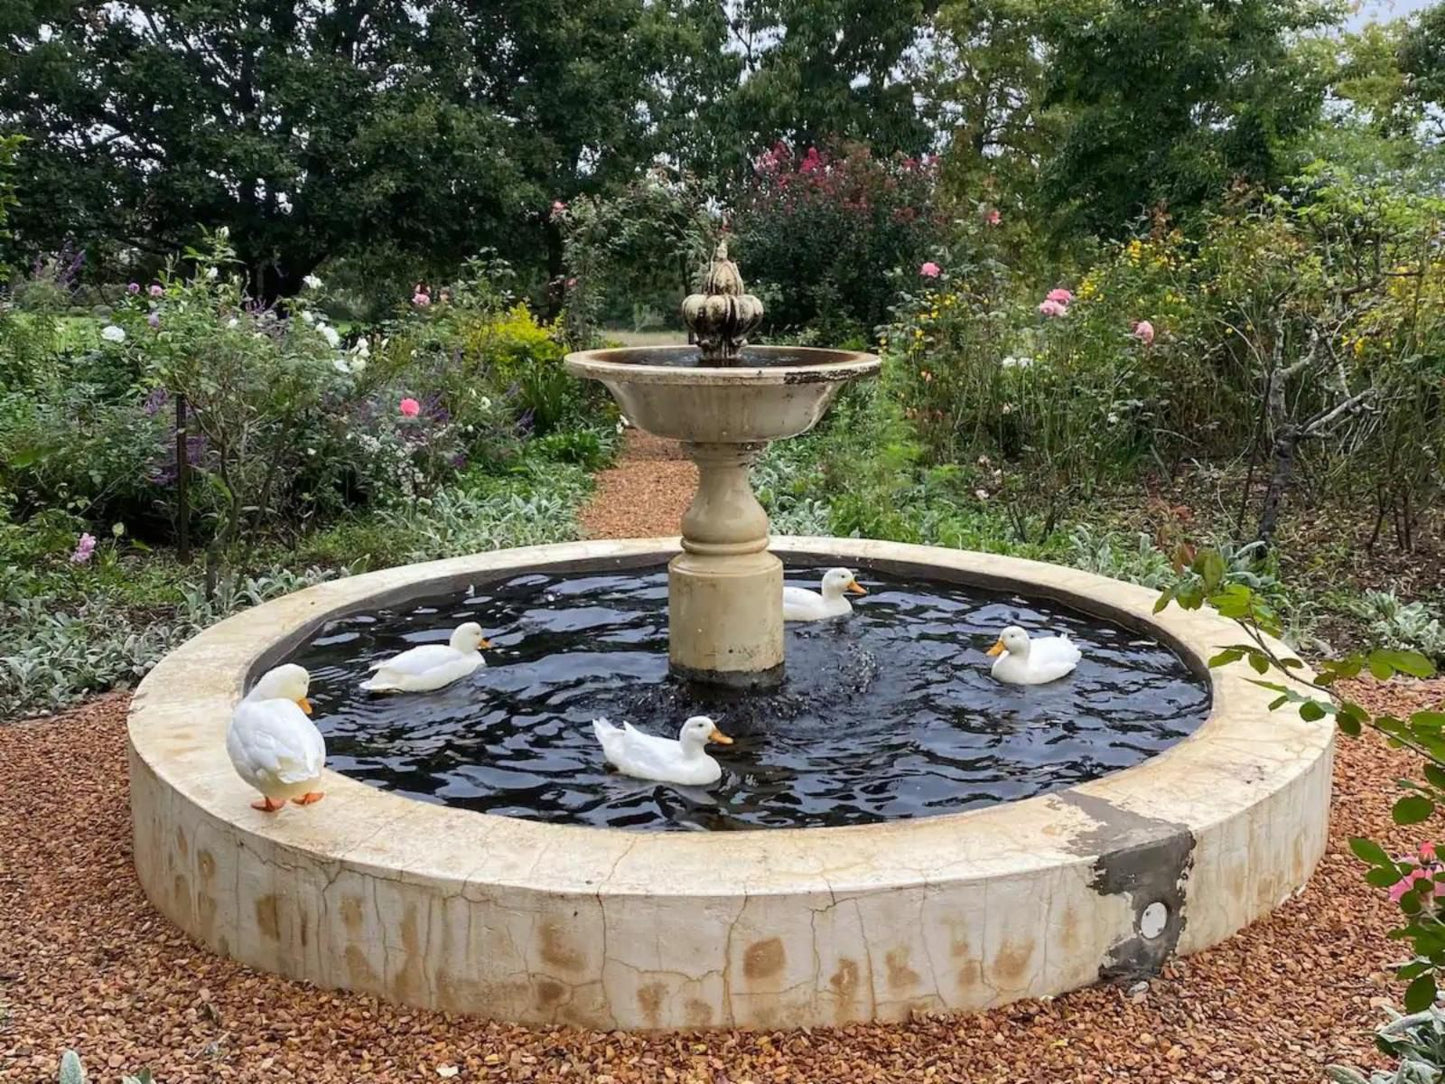 Zeekoegat Historical Homestead Riversdale Western Cape South Africa Fountain, Architecture, Garden, Nature, Plant, Swimming Pool